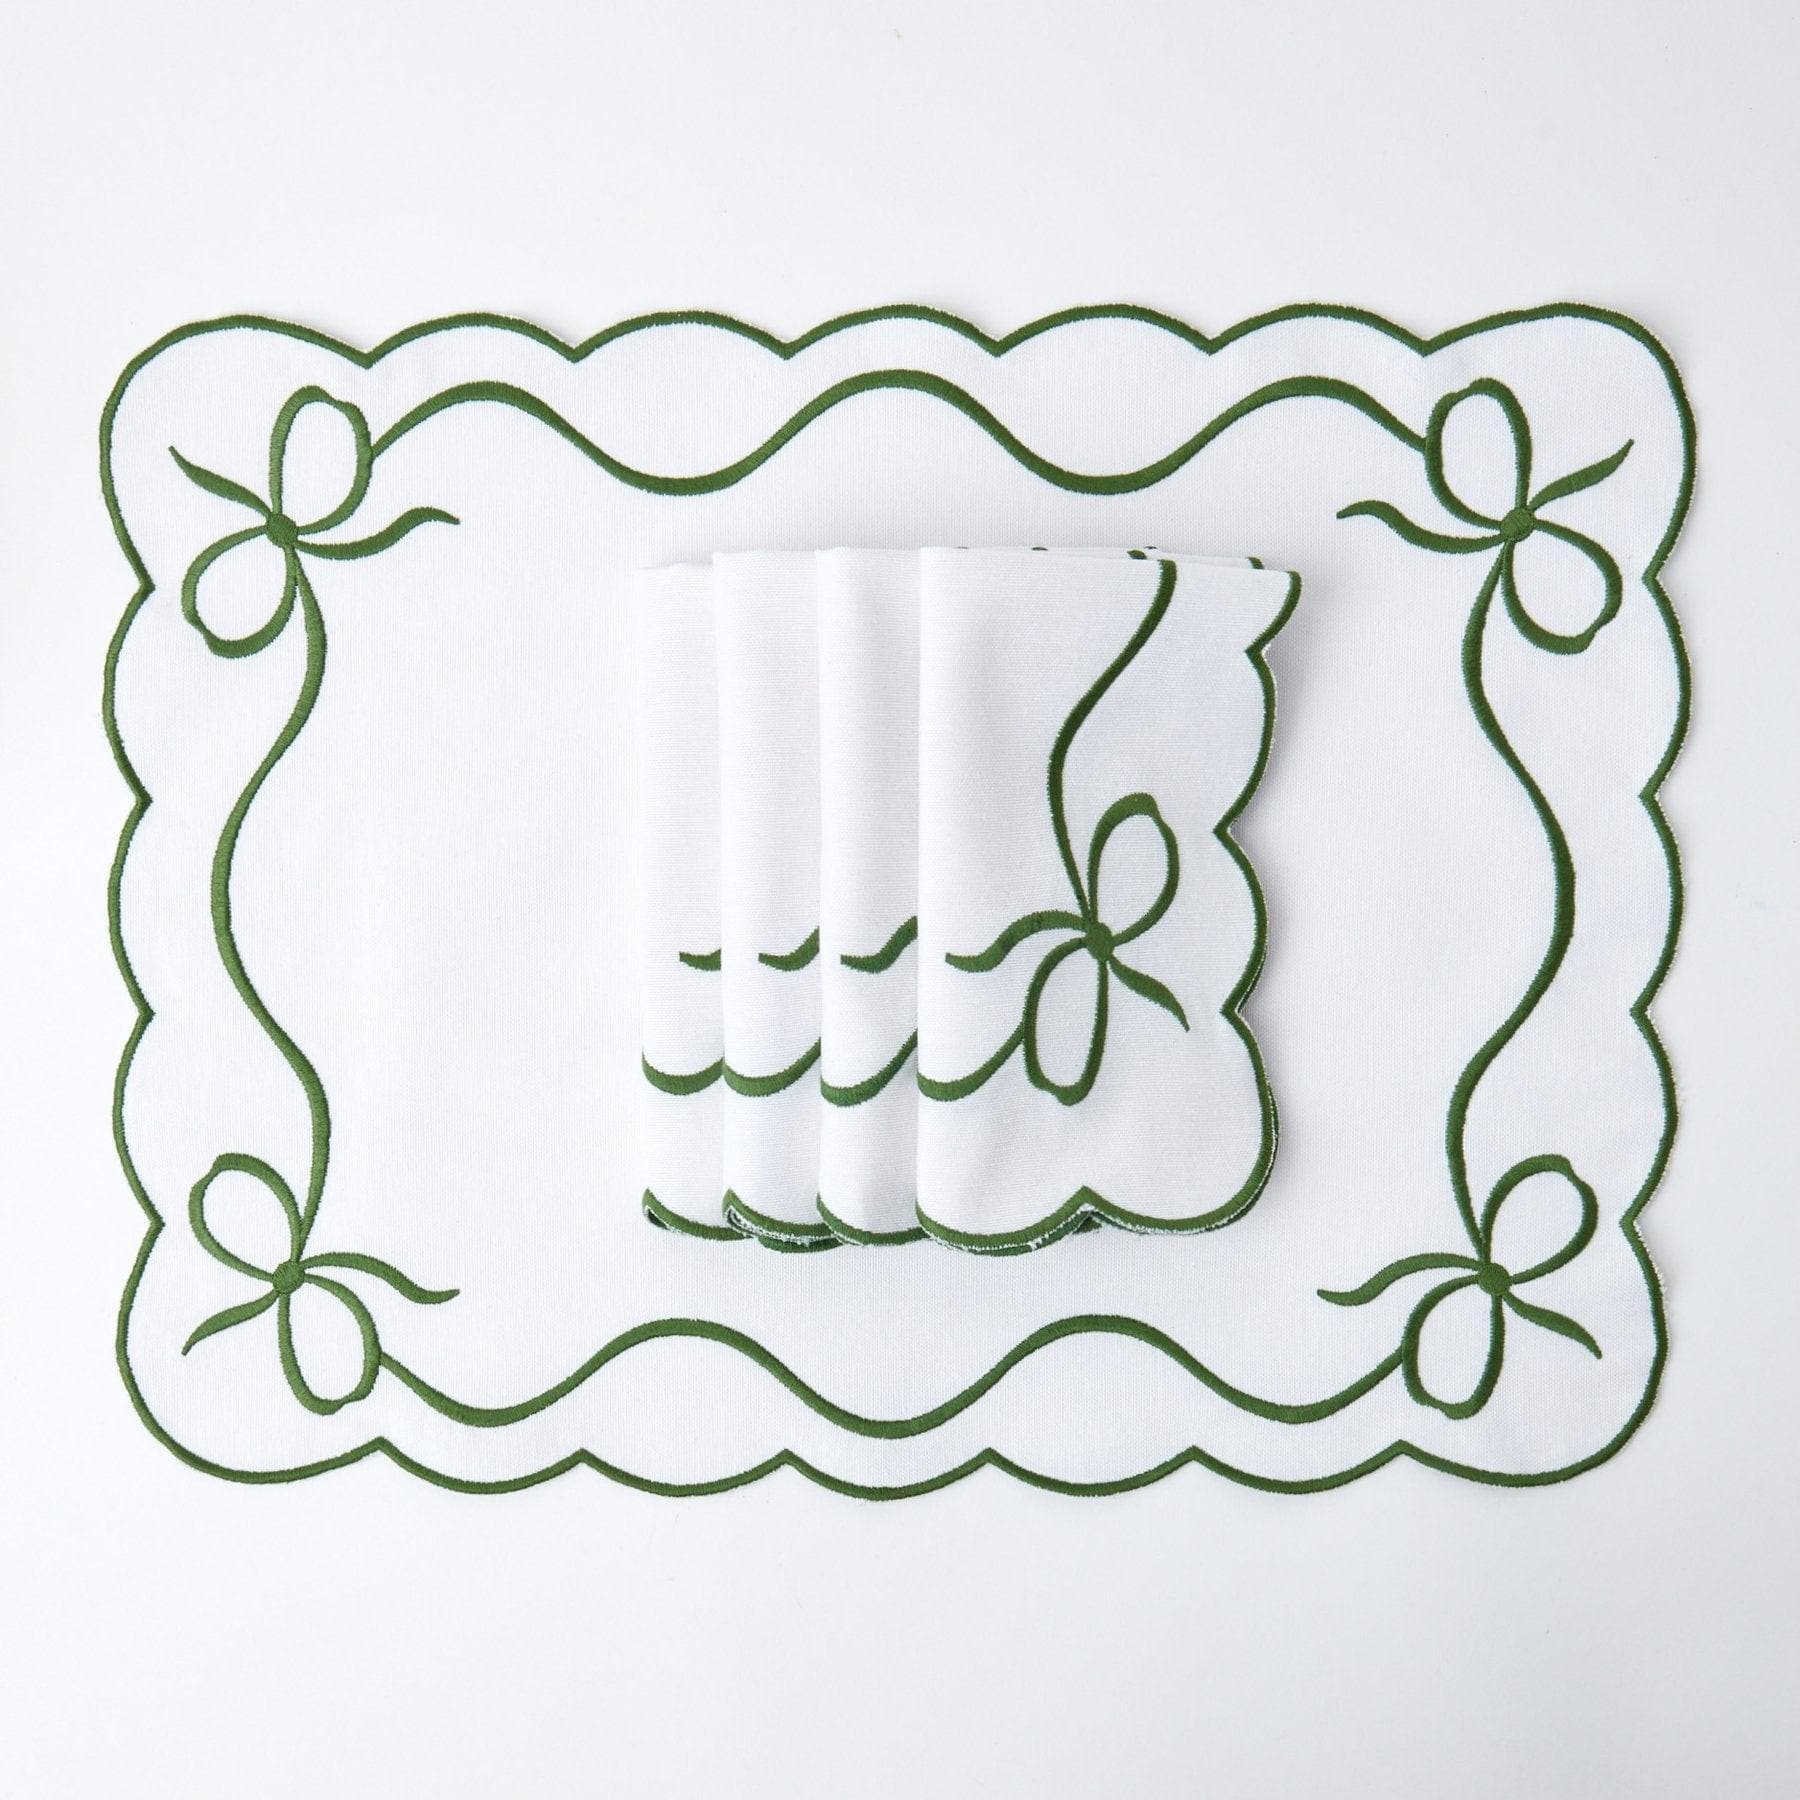 Elegant Emeral Green Embroidered Linen Placemats and Napkins Set